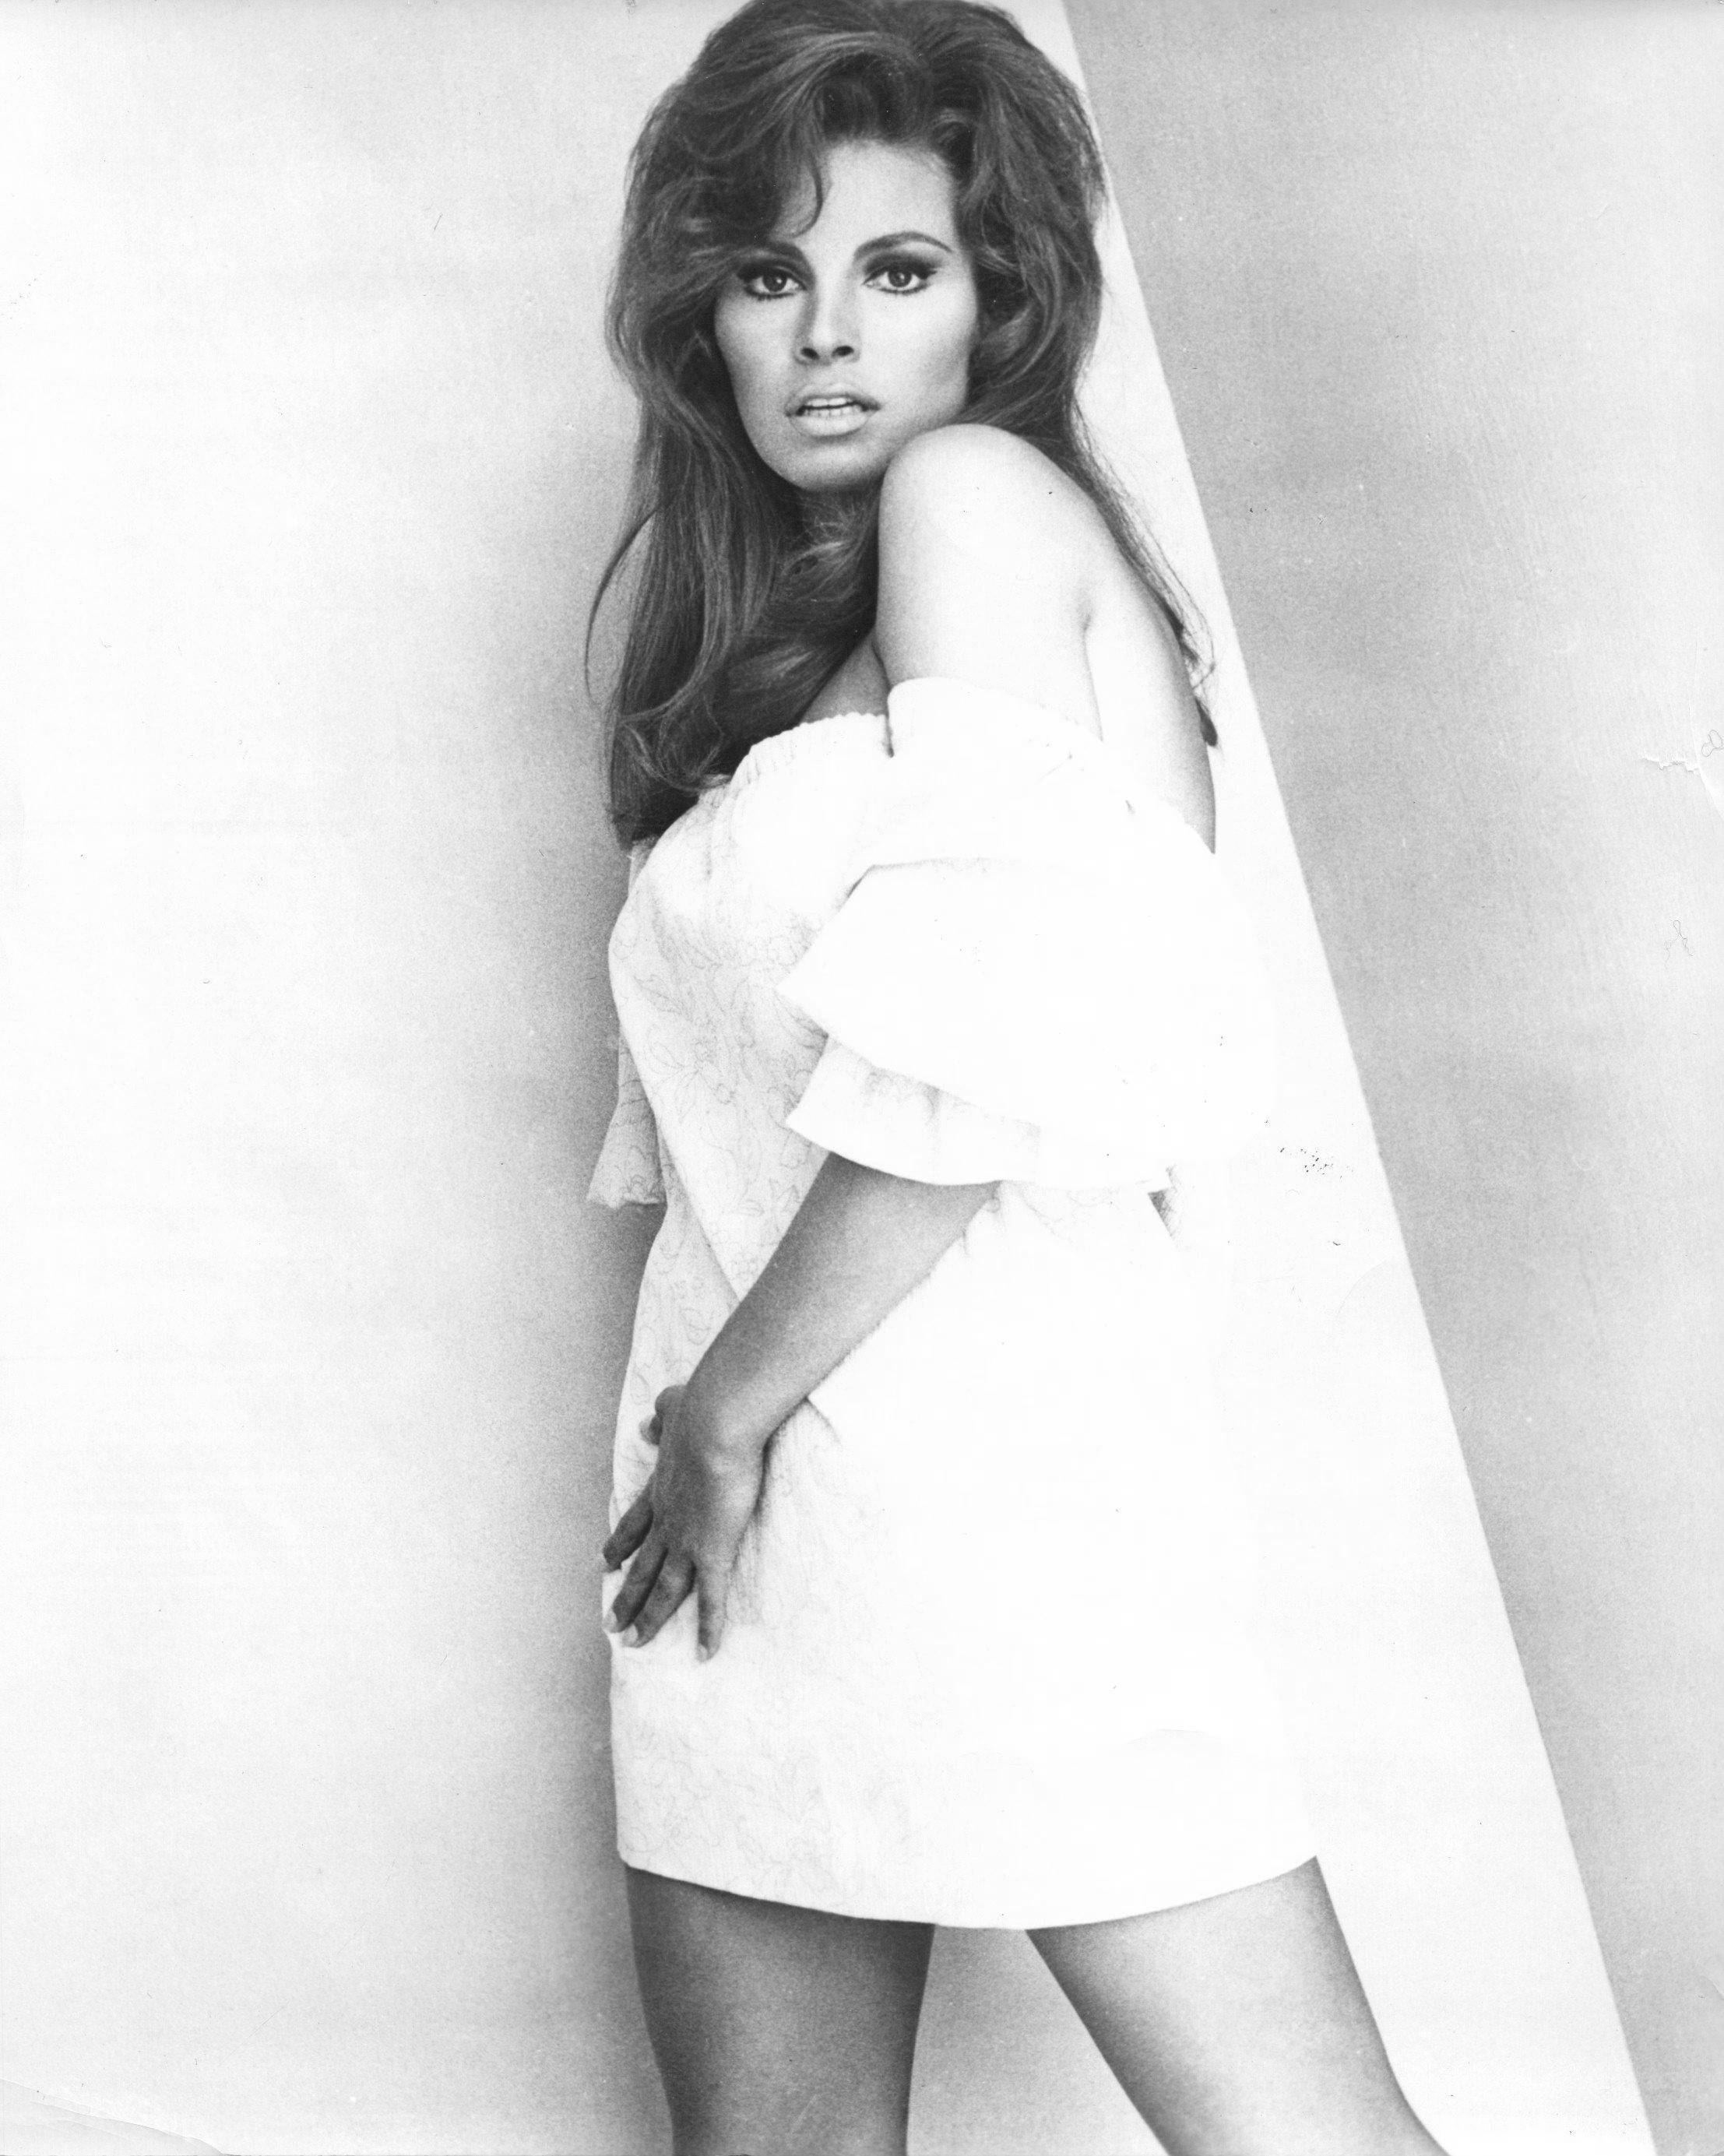 Unknown Black and White Photograph - Raquel Welch Pinup in White Mini Dress Vintage Original Photograph